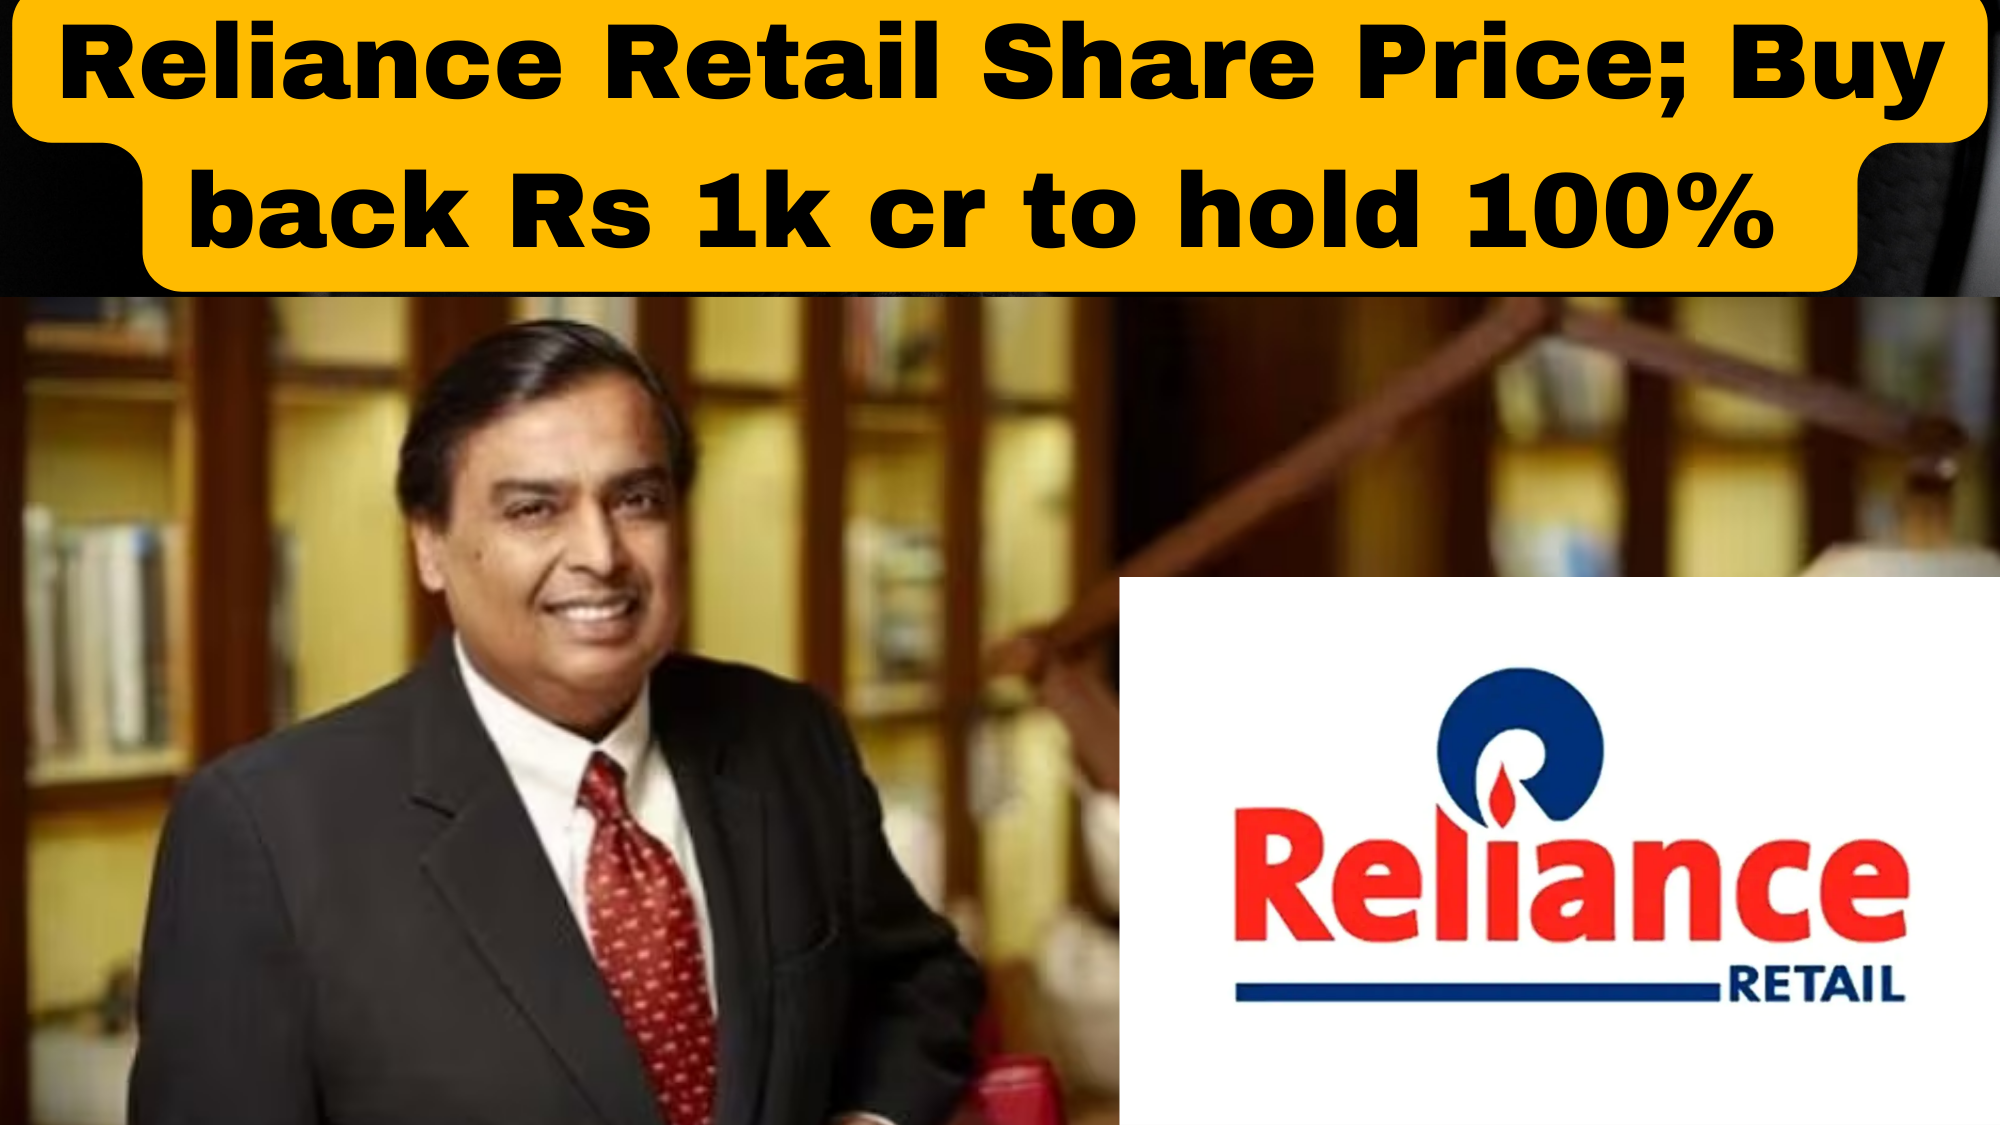 Reliance Retail Share Price; Buy back Rs 1k cr to hold 100%